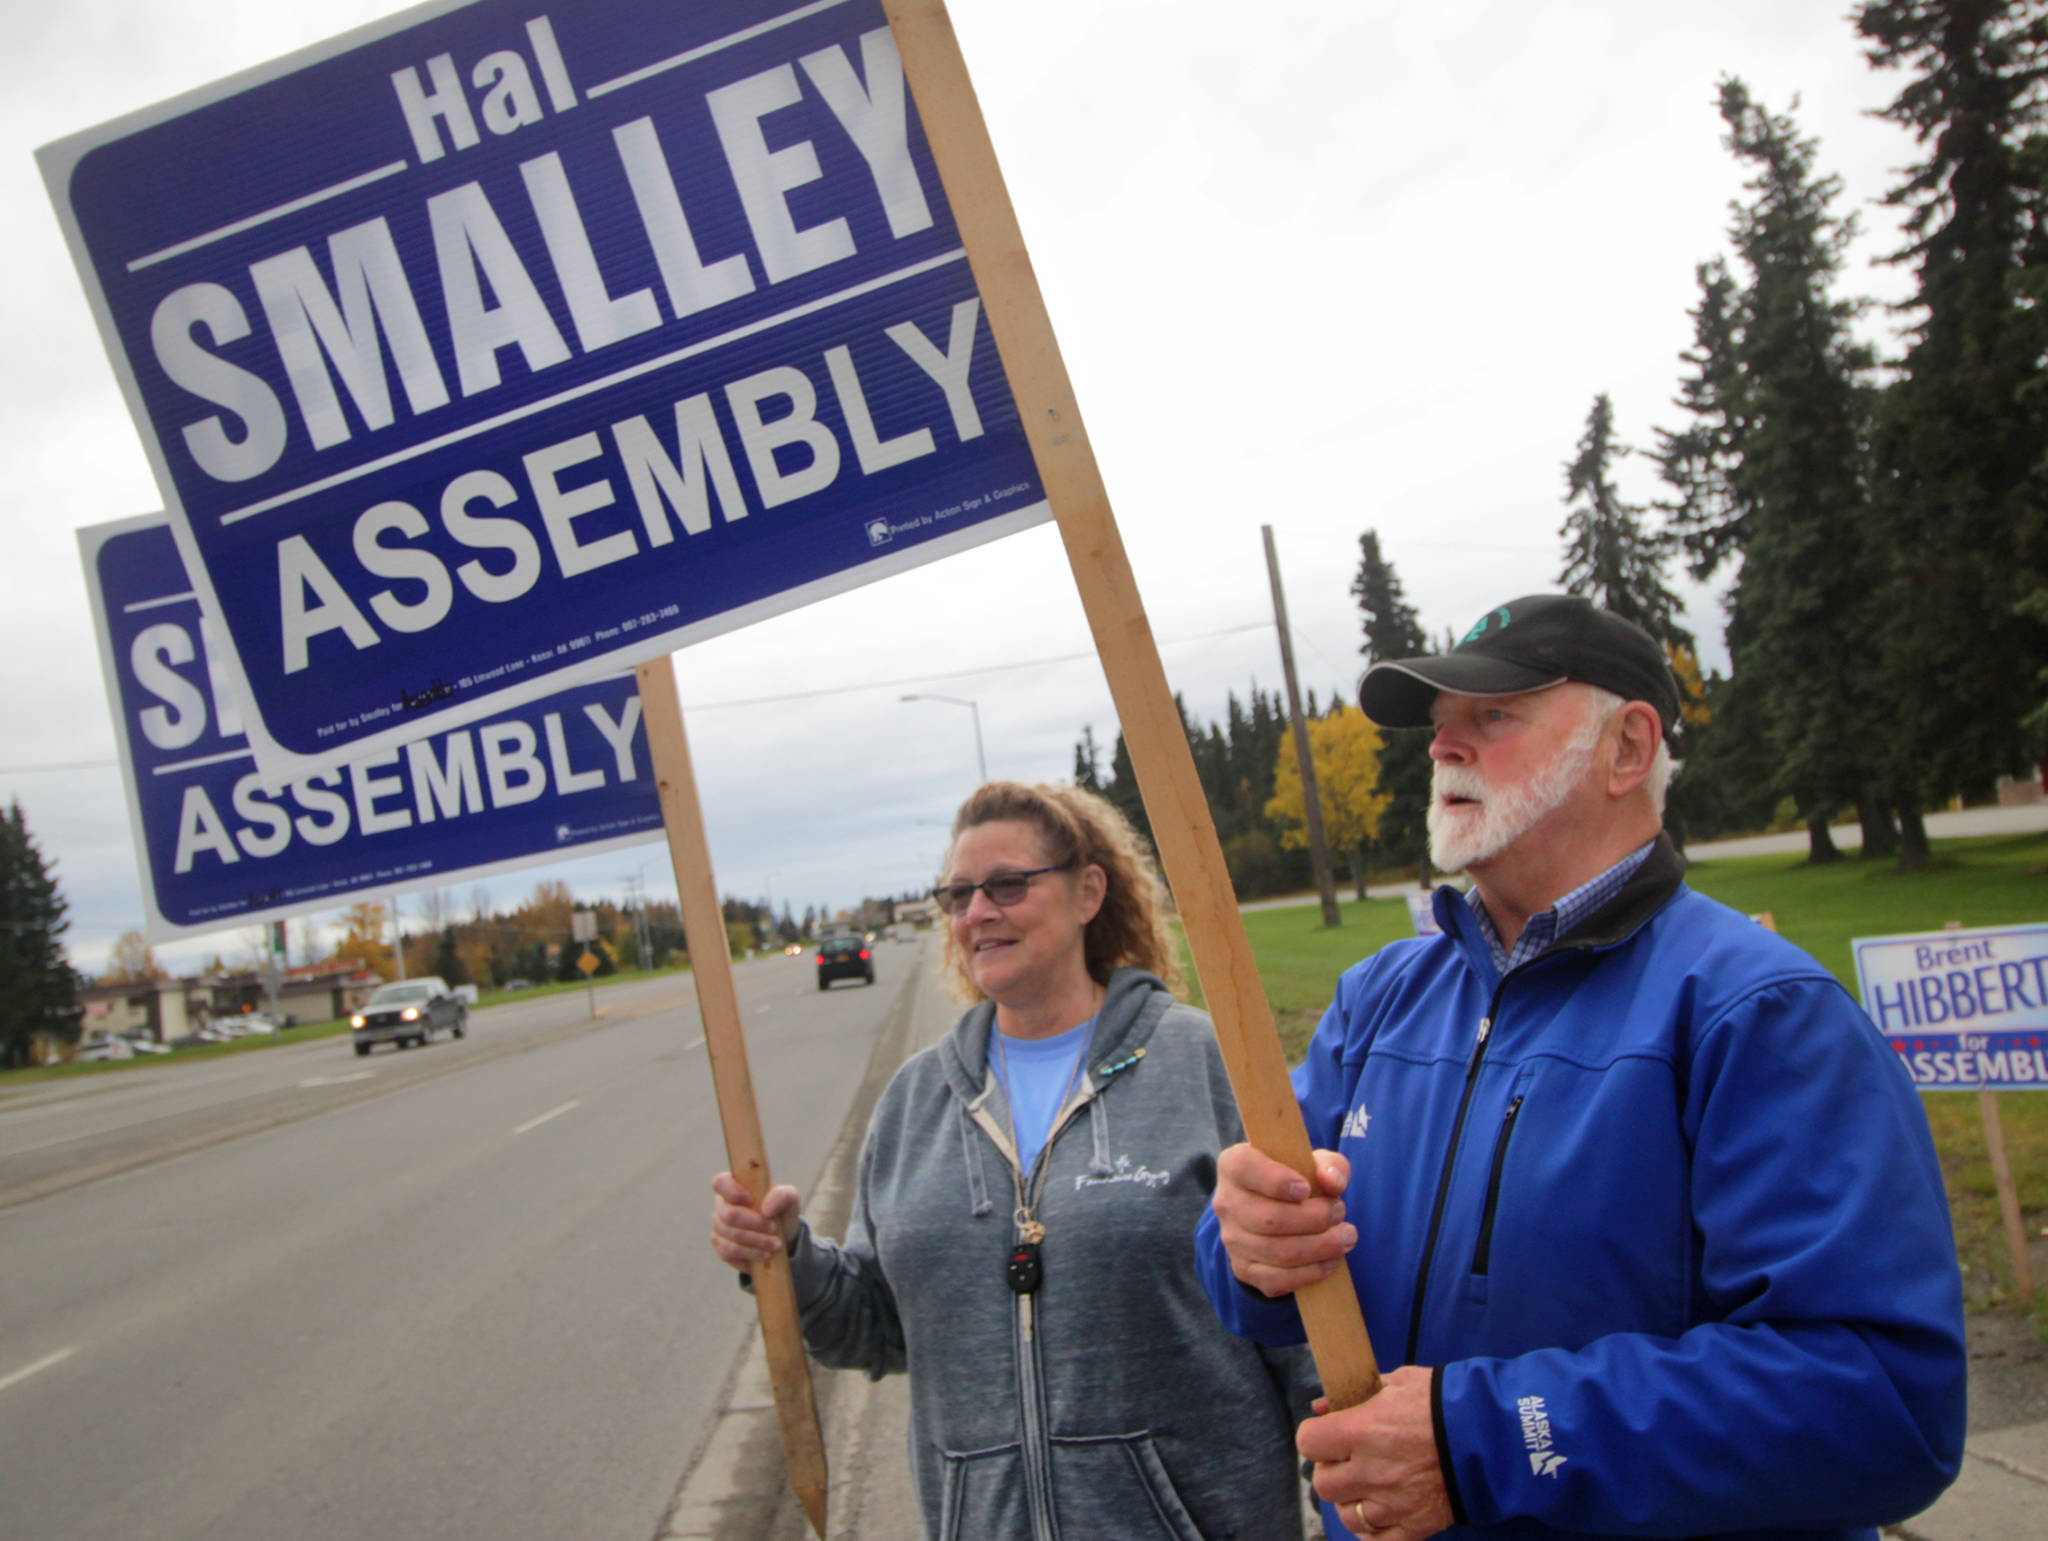 Kenai Peninsula Bourough assembly candidate Hal Smalley and supporter Michele Vasquez wave signs near the intersection of the Kenai Spur Highway and Bridge Access Road on Tuesday, Oct. 3 in Kenai. (Ben Boettger/Peninsula Clarion)